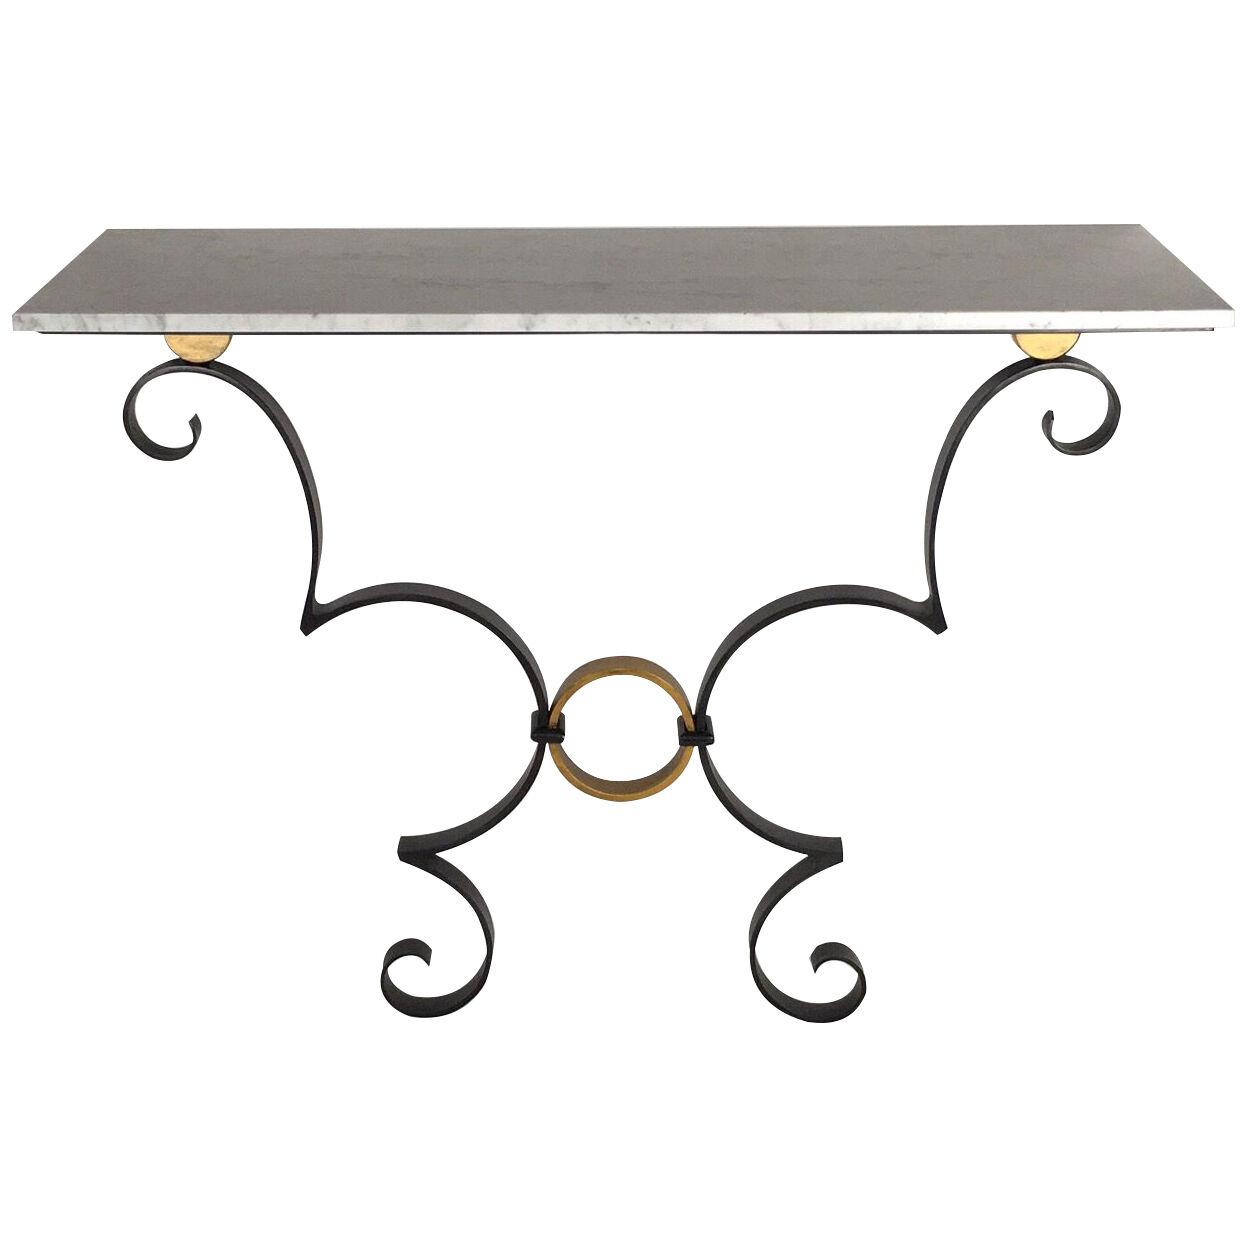 Contemporary hand forged bespoke console table inspired by "Poillerat"